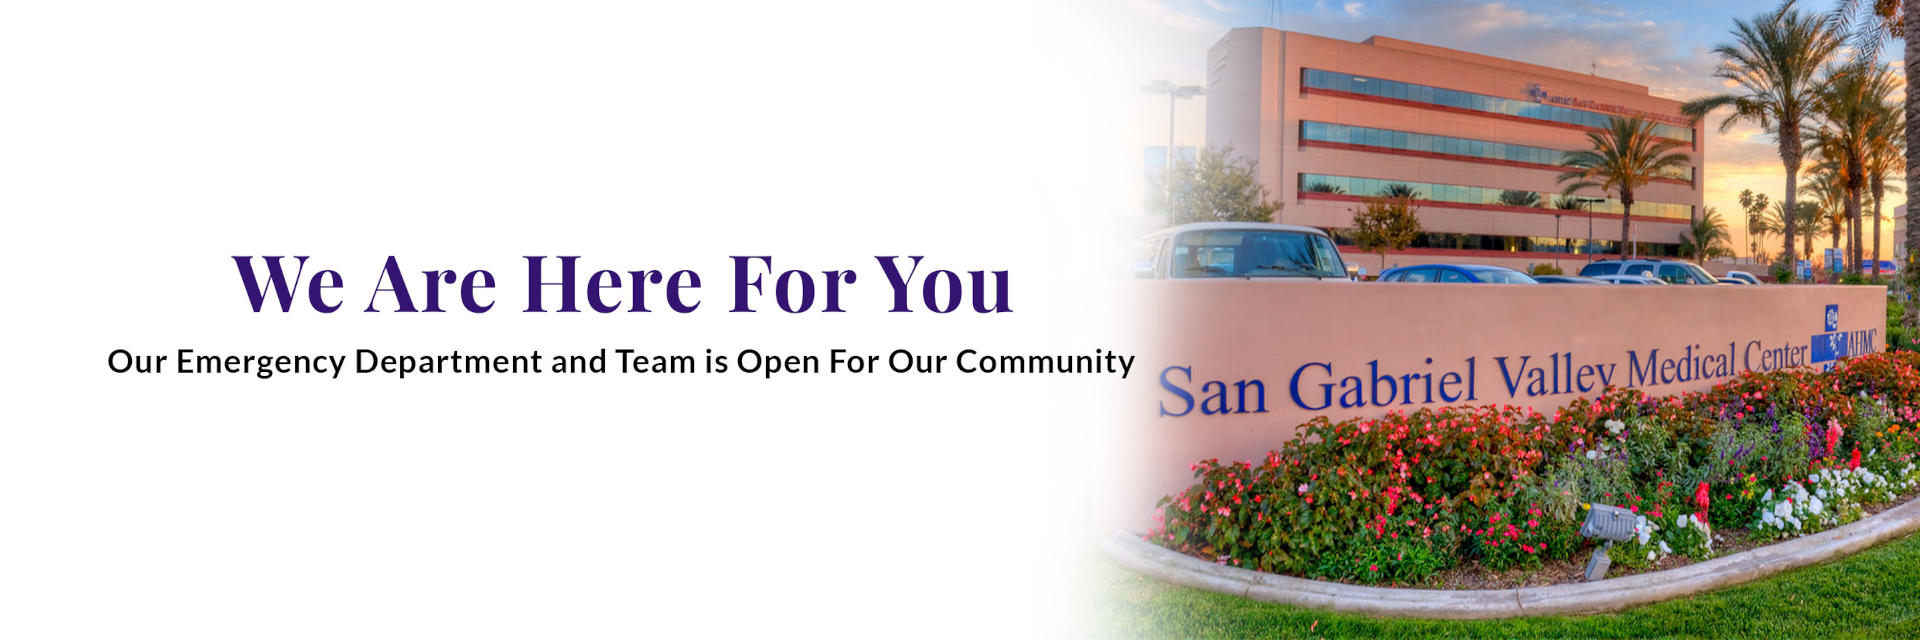 We Are Here For You
Our Emergency Department and Team is Open For Our Community